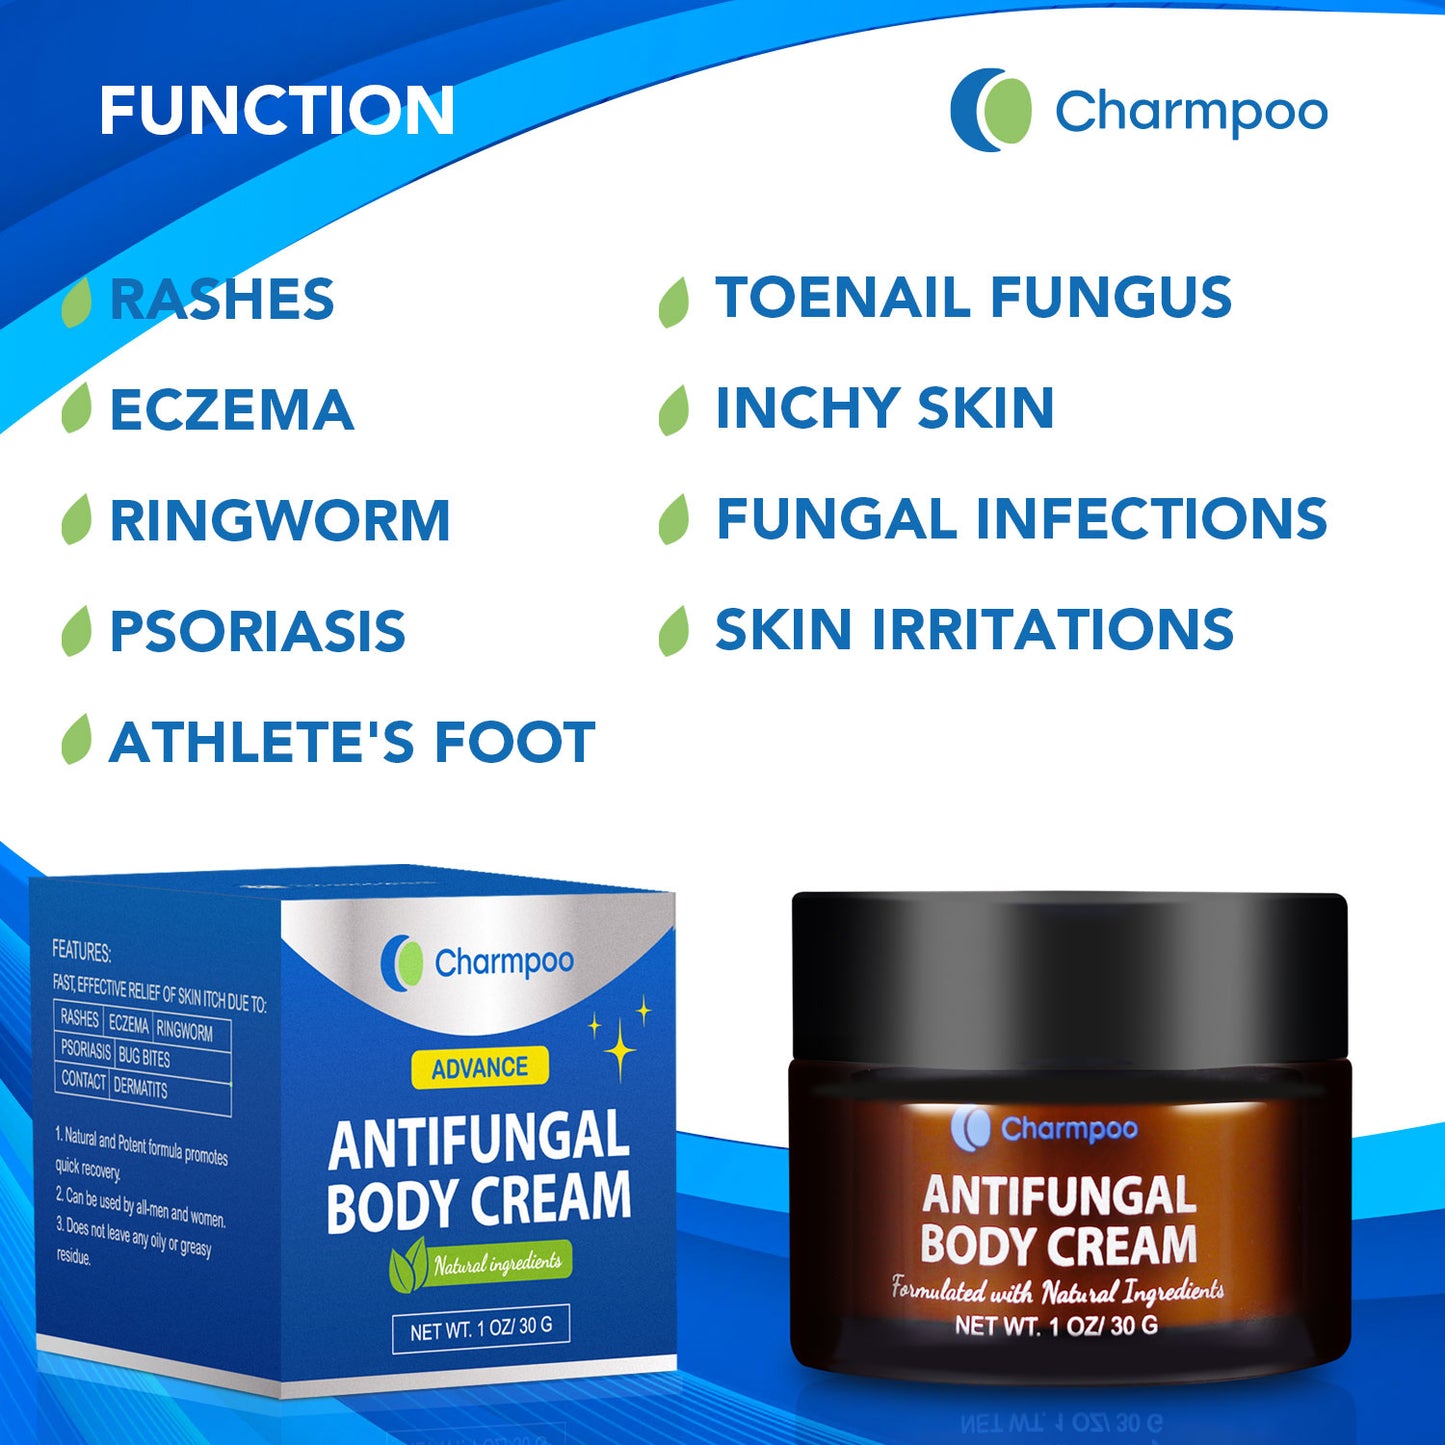 Charmpoo Antifungal Cream, Anti-Itch Cream for Athletes Foot, Eczema, Ringworm, Jock Itch and Nail Fungal Infections, Anti-Itch Balm for Face & Body, Maximum Strength-30g